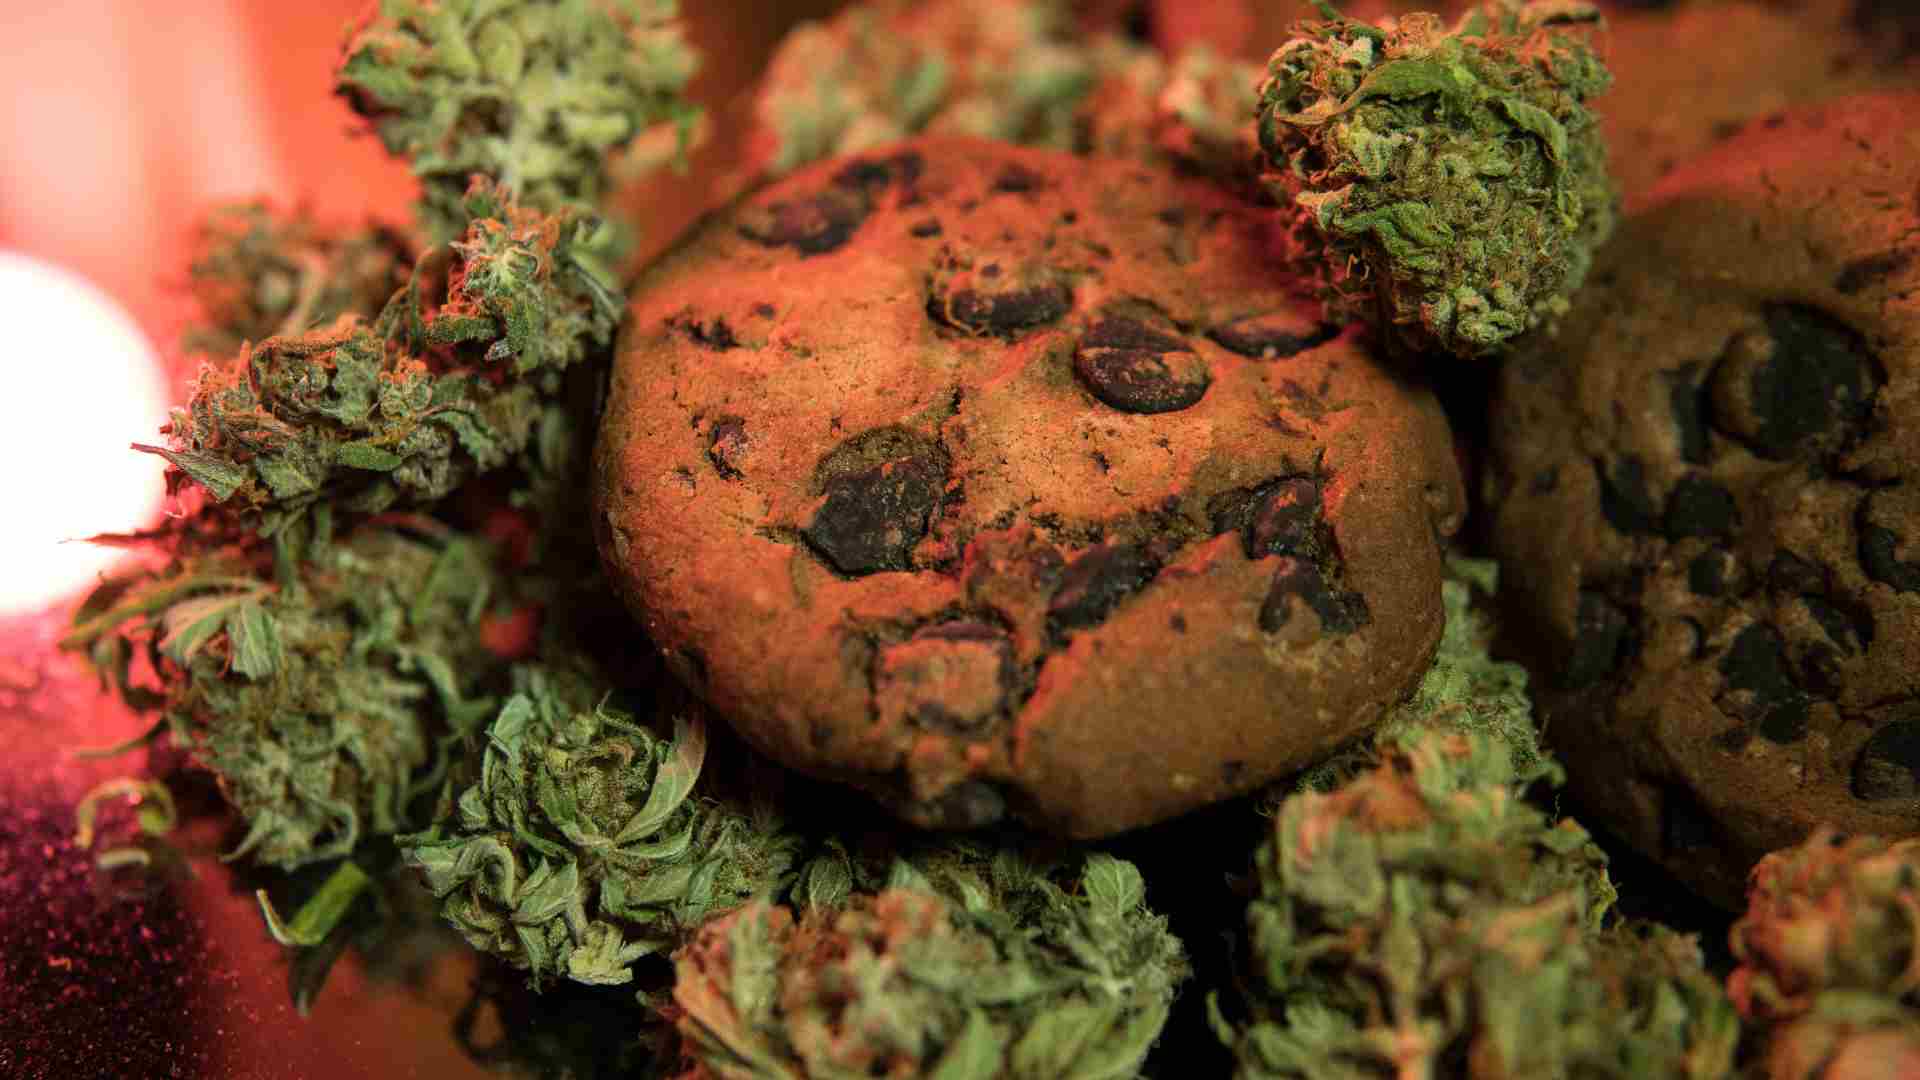 how to make cannabis edibles without a strong cannabis taste